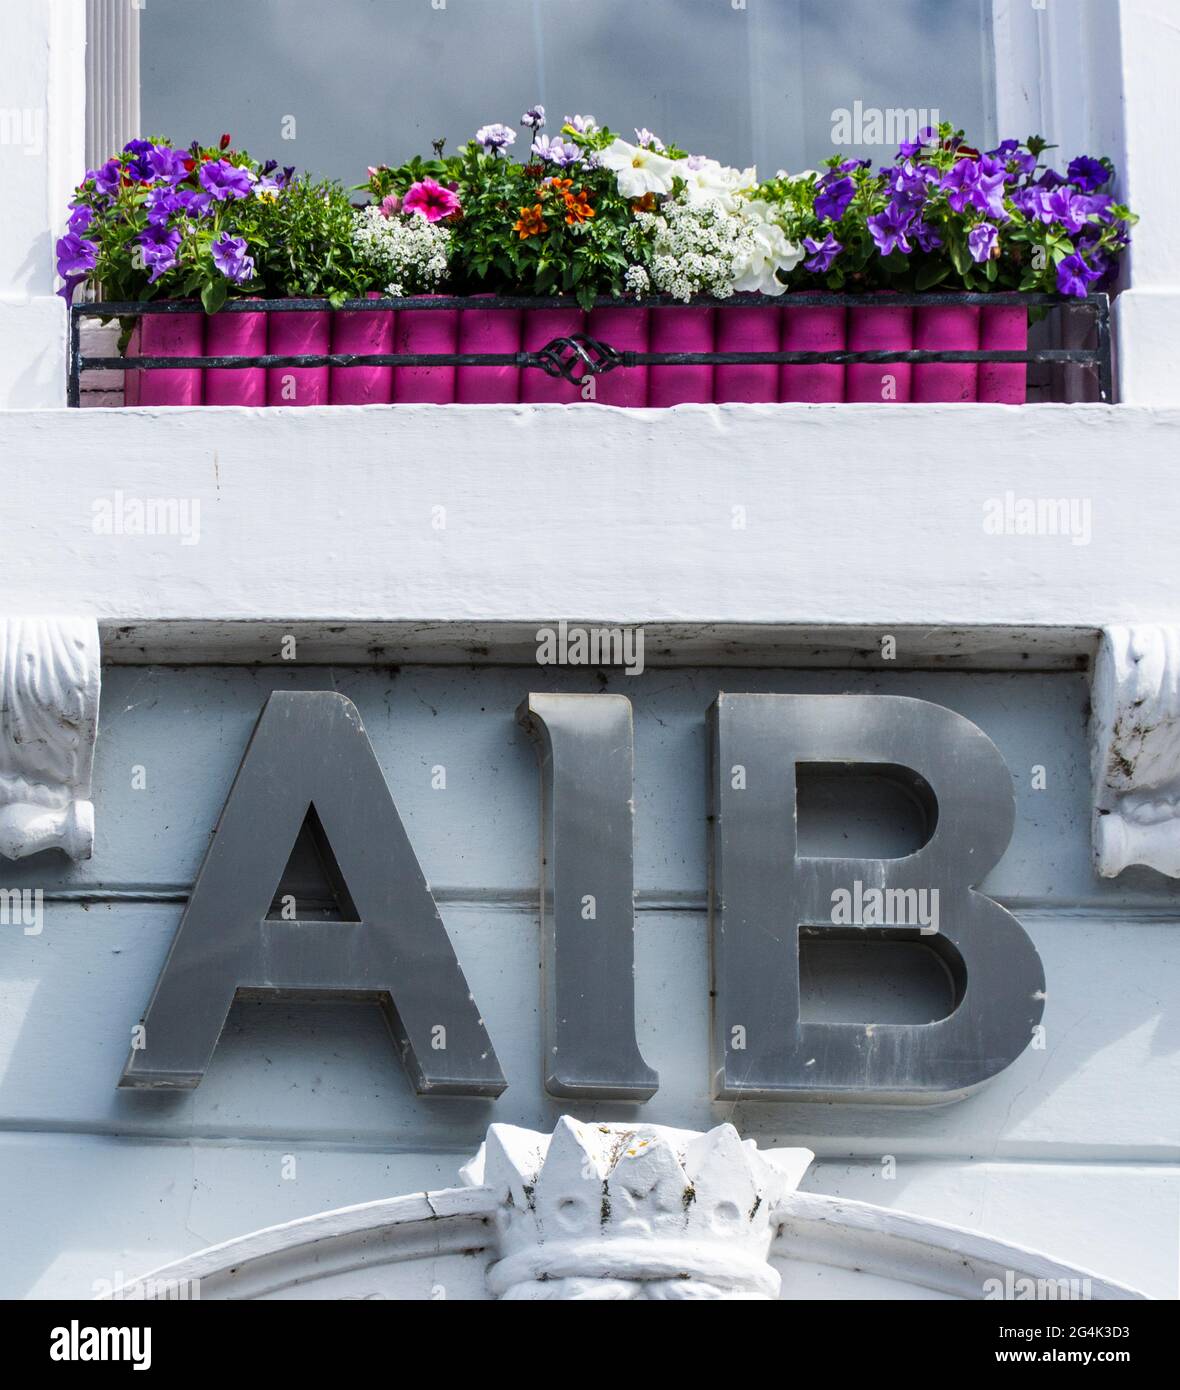 AIB - Allied Irish Bank - frontage with logo in Letterkenny, County Donegal, Ireland Stock Photo